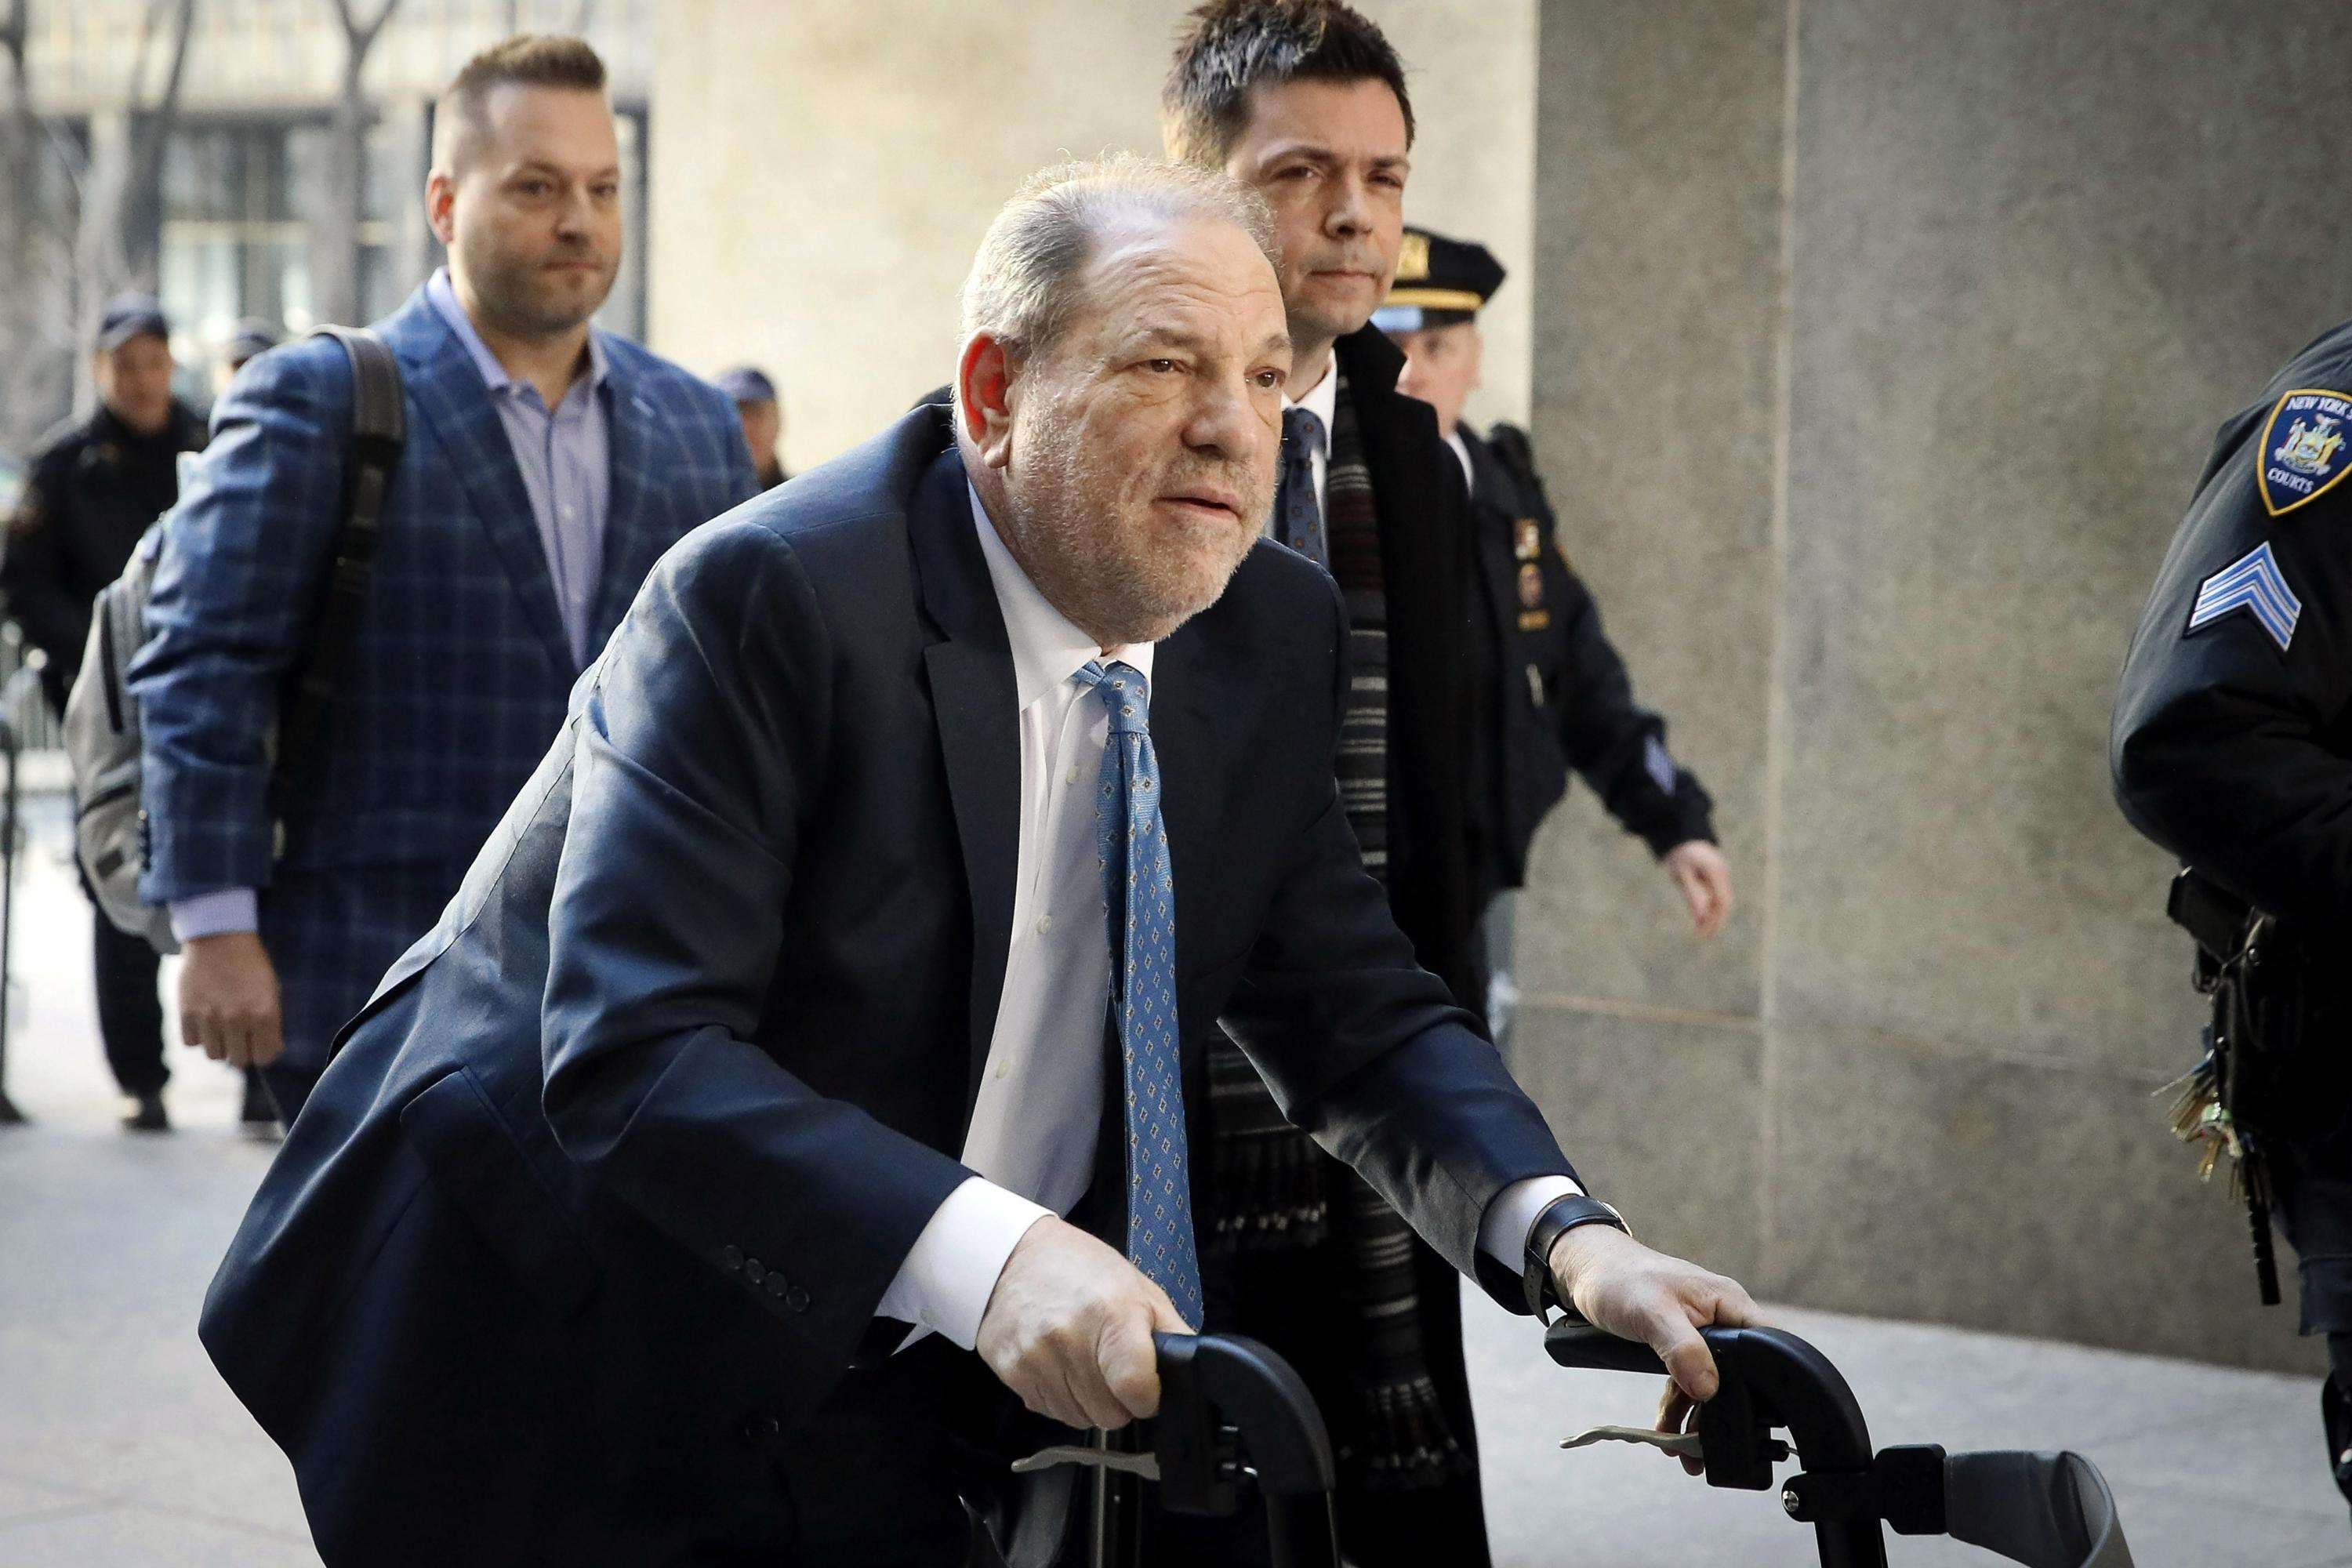 image for Harvey Weinstein’s rape conviction upheld by appeals court